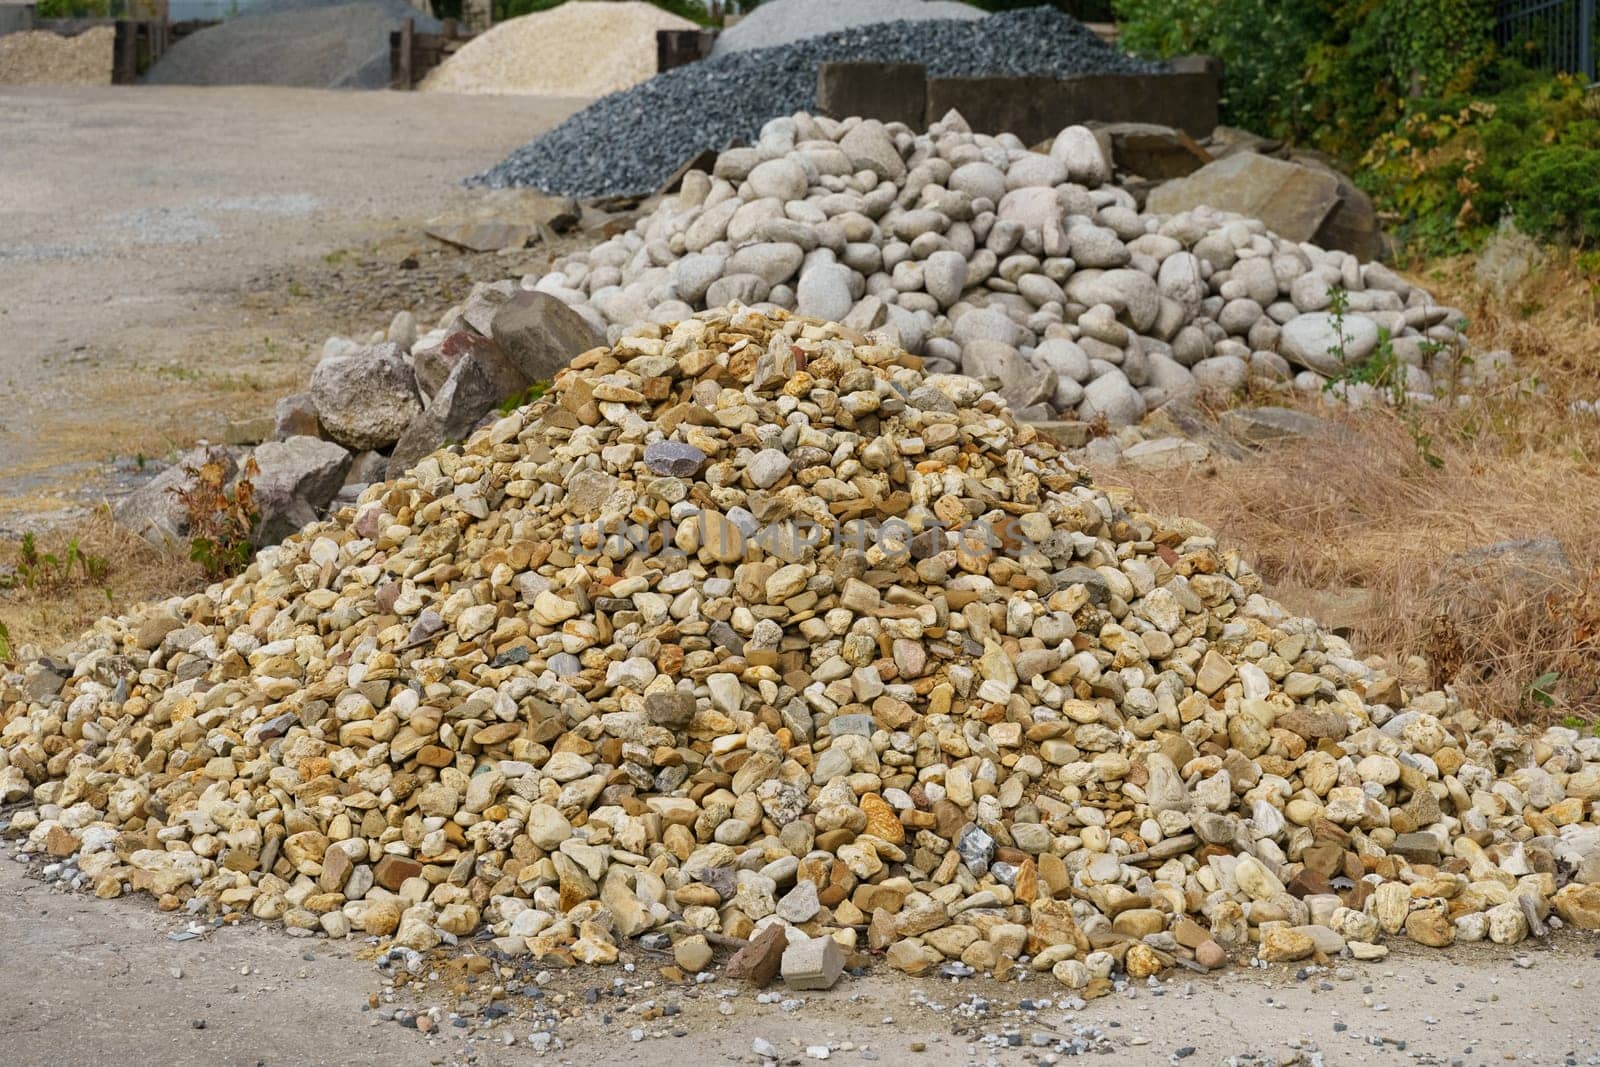 Pile of Rocks on Roadside by Sd28DimoN_1976